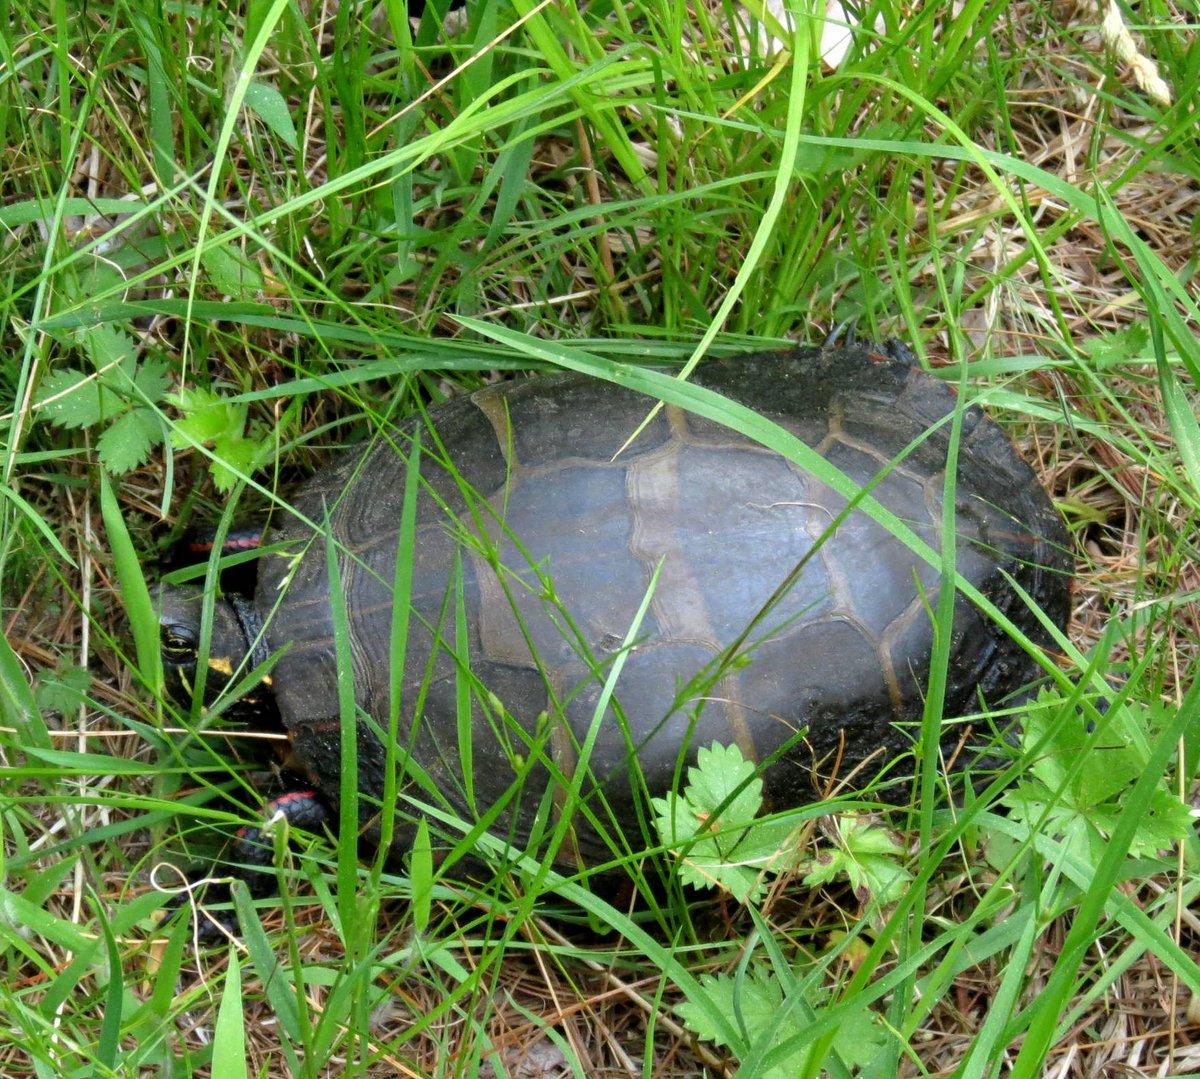 2. Turtle in the Grass